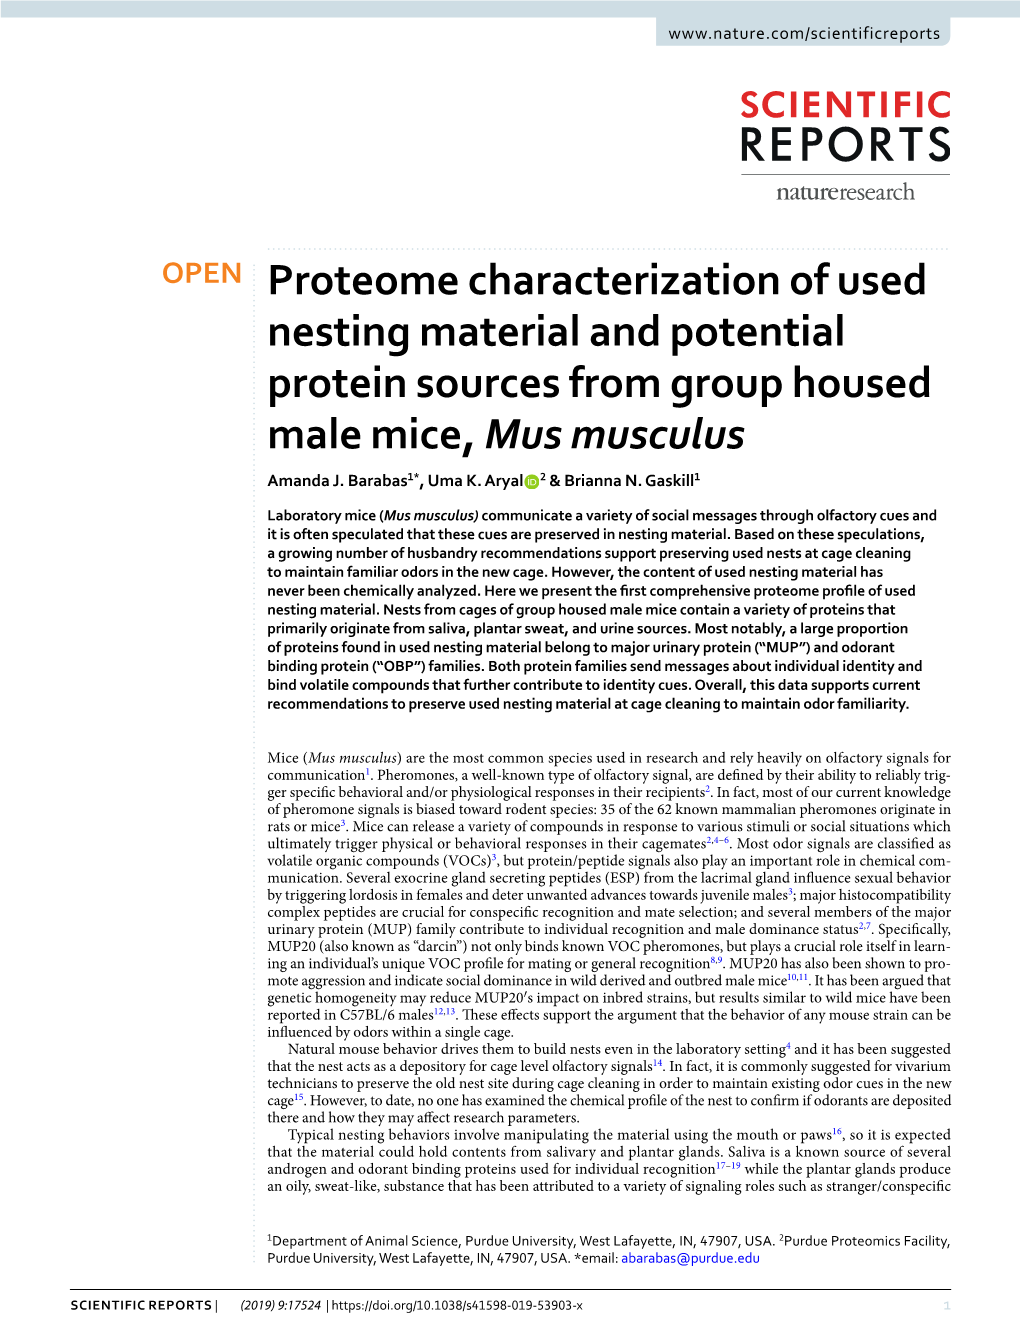 Proteome Characterization of Used Nesting Material and Potential Protein Sources from Group Housed Male Mice, Mus Musculus Amanda J